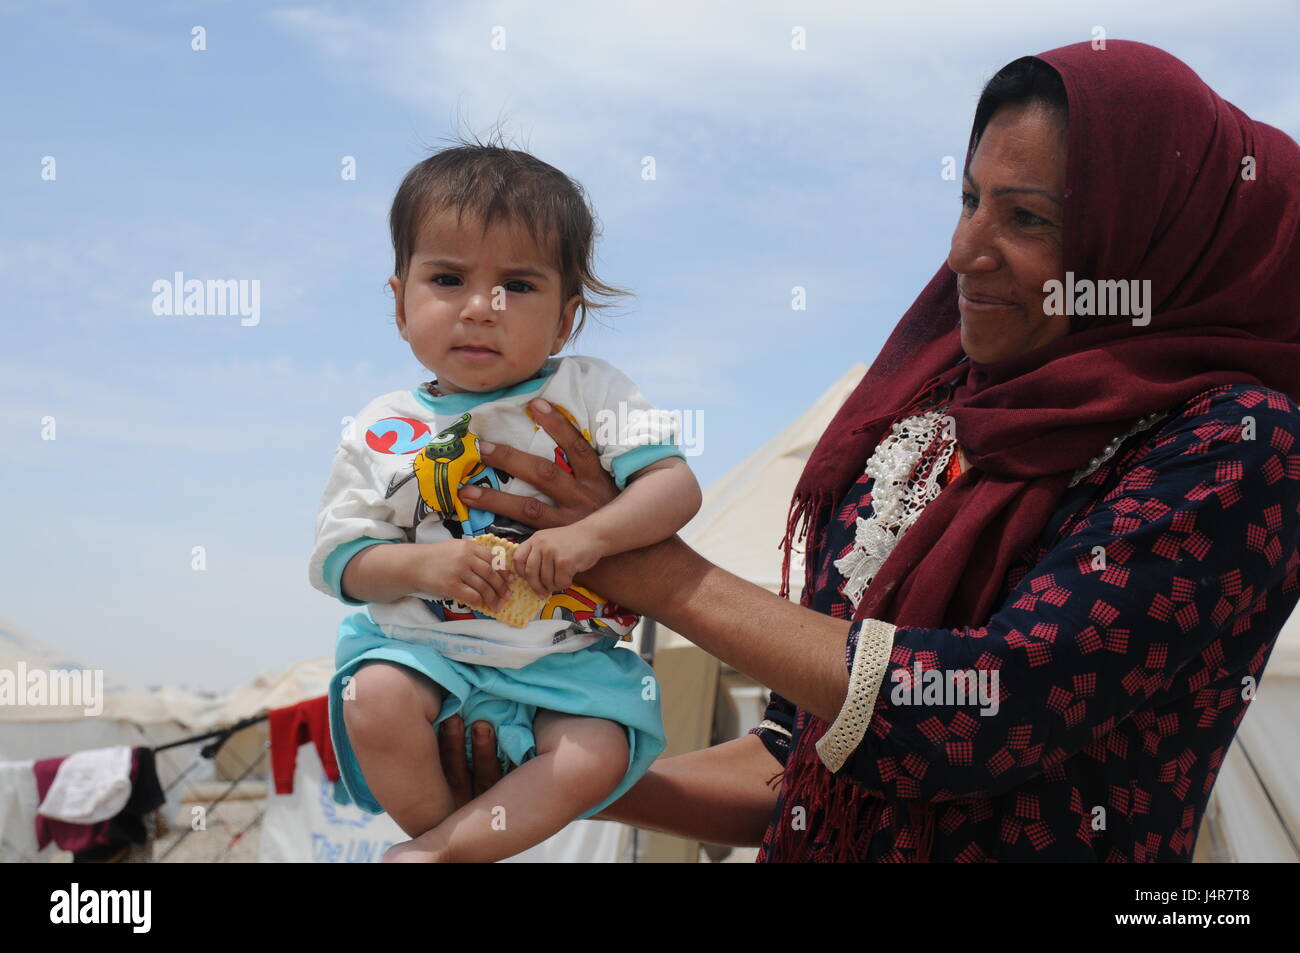 Mosul, Iraq. 13th May, 2017. A woman holds her child in Hassansham U2 Camp, about 30 km east to Mosul, Iraq, on May 13, 2017. The camp has a capacity to accommodate more than 9,000 people when fully occupied. According to Iraqi authorities, more than 630,000 people have been displaced from Mosul and surrounding areas since October 2016, when the military operation began. This includes more than 434,000 displaced from western Mosul since mid-February of this year. Credit: Wei Yudong/Xinhua/Alamy Live News Stock Photo